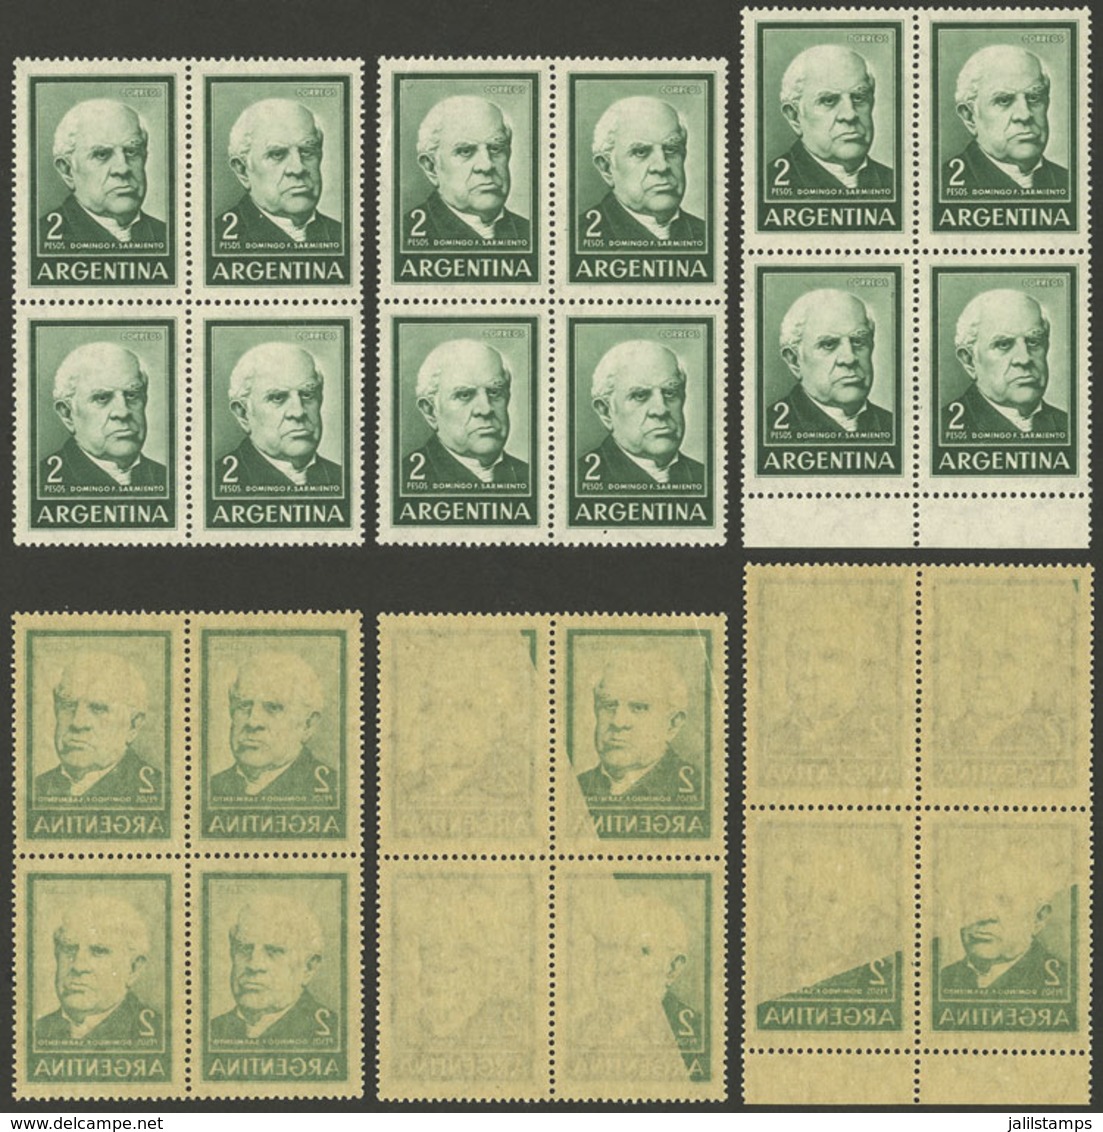 ARGENTINA: GJ.1135, 2P. Sarmiento On Unsurfaced Paper, Block Of 4 With OFFSET IMPRESSION On Back + Other 2 With Partial  - Unused Stamps